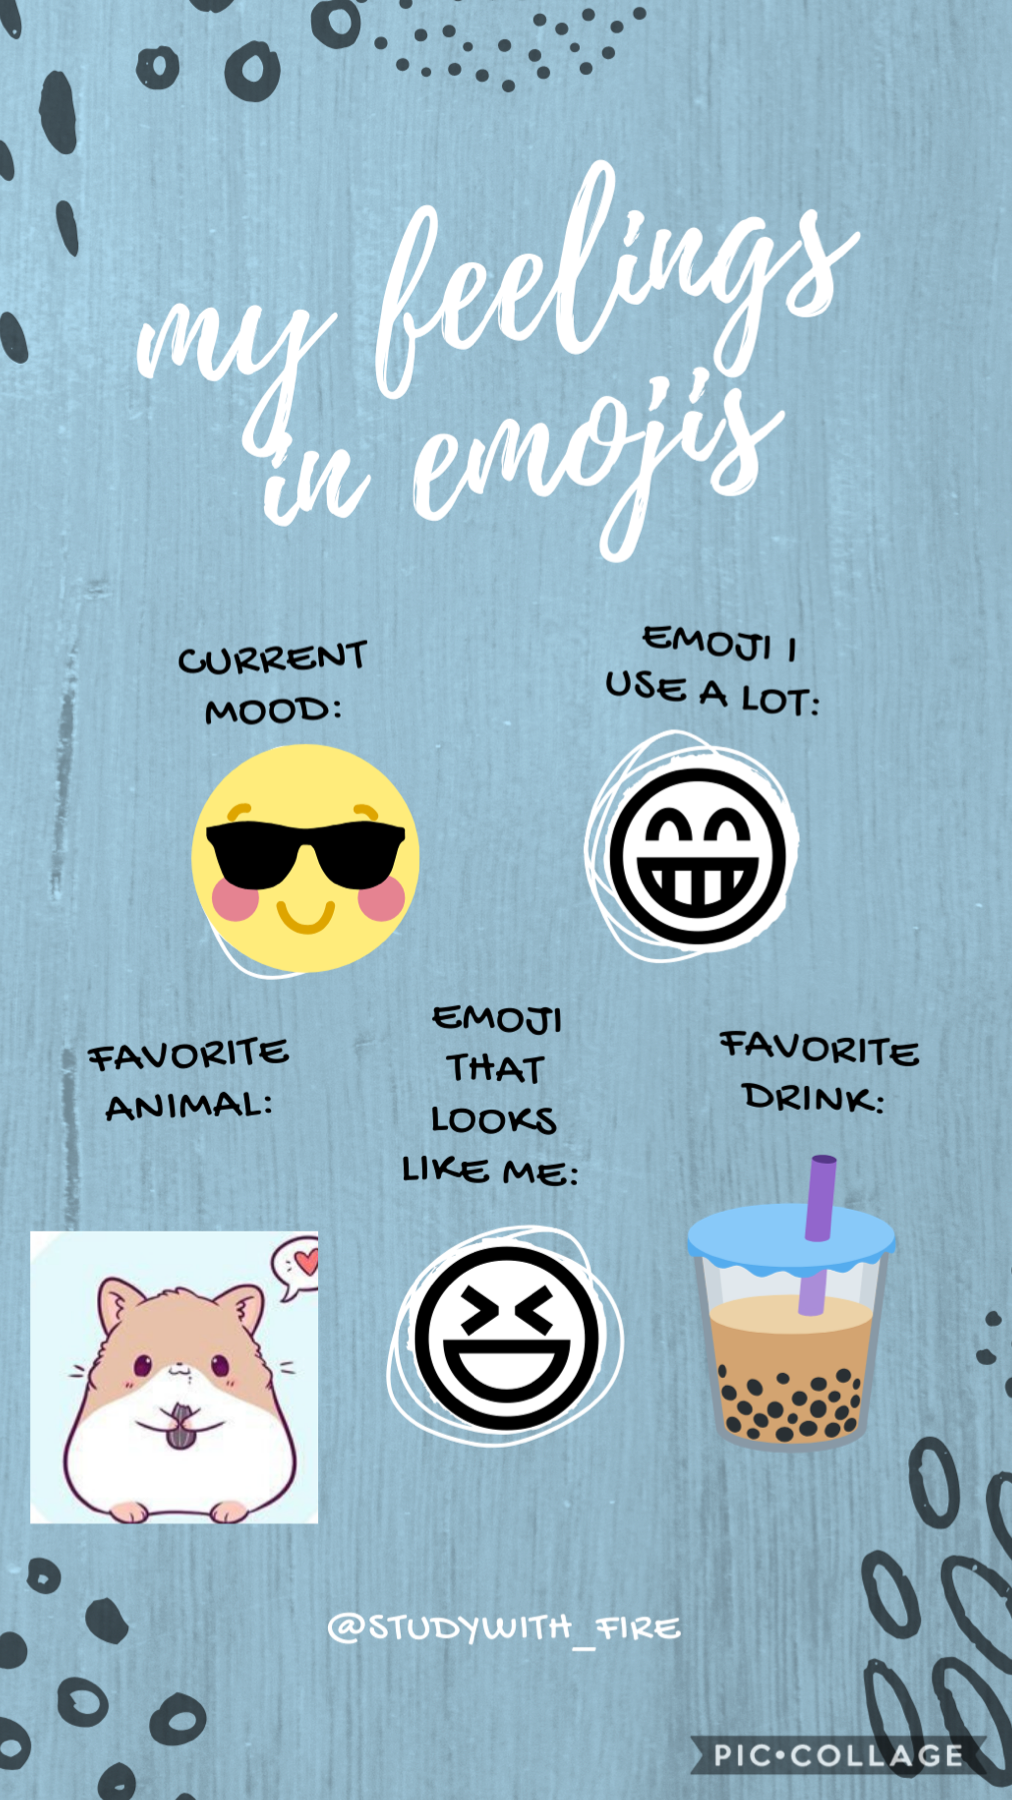 My feelings in emojis. This are my normal feelings but now I am just gloomy. But PicCollage cheers me up...